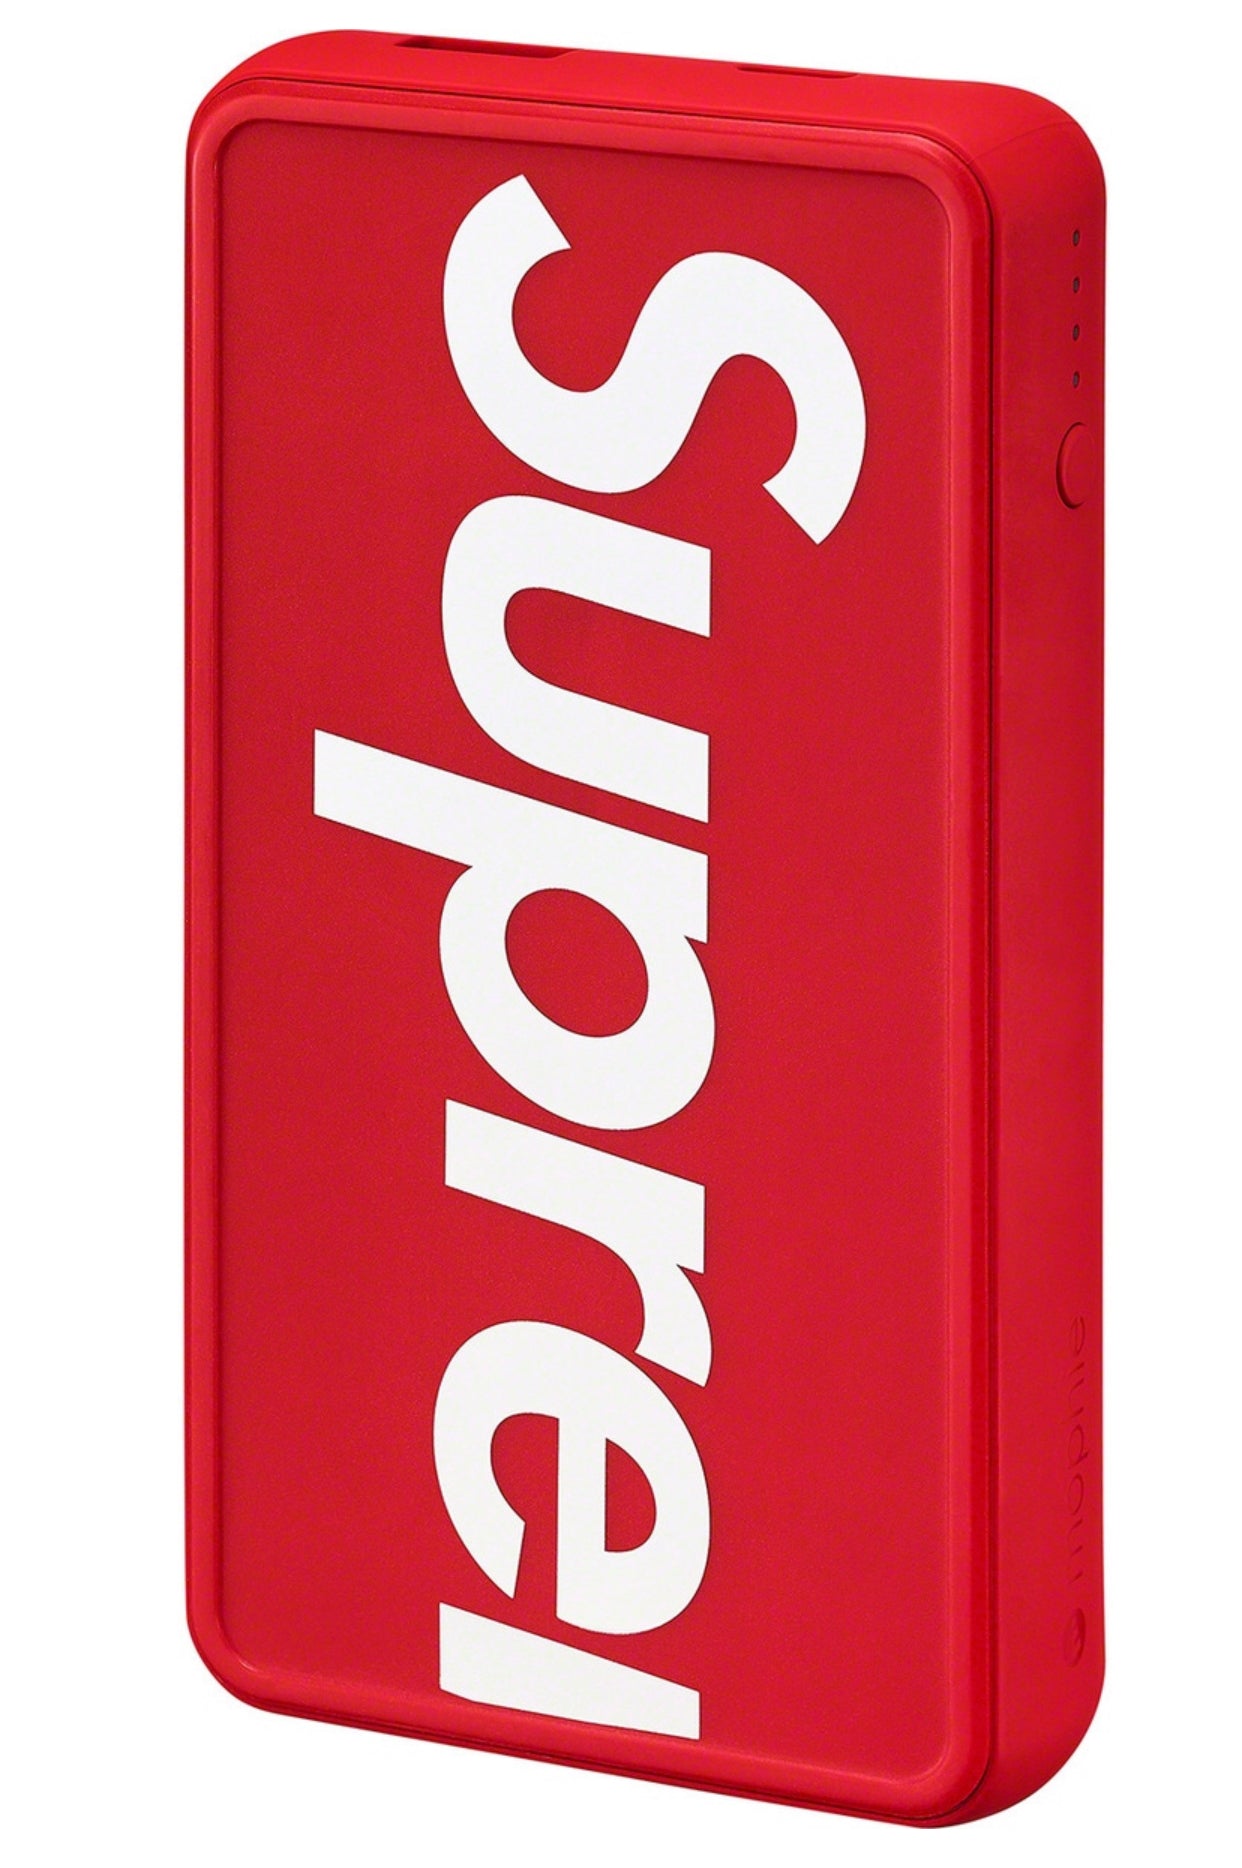 Supreme mophie | www.360healthservices.com